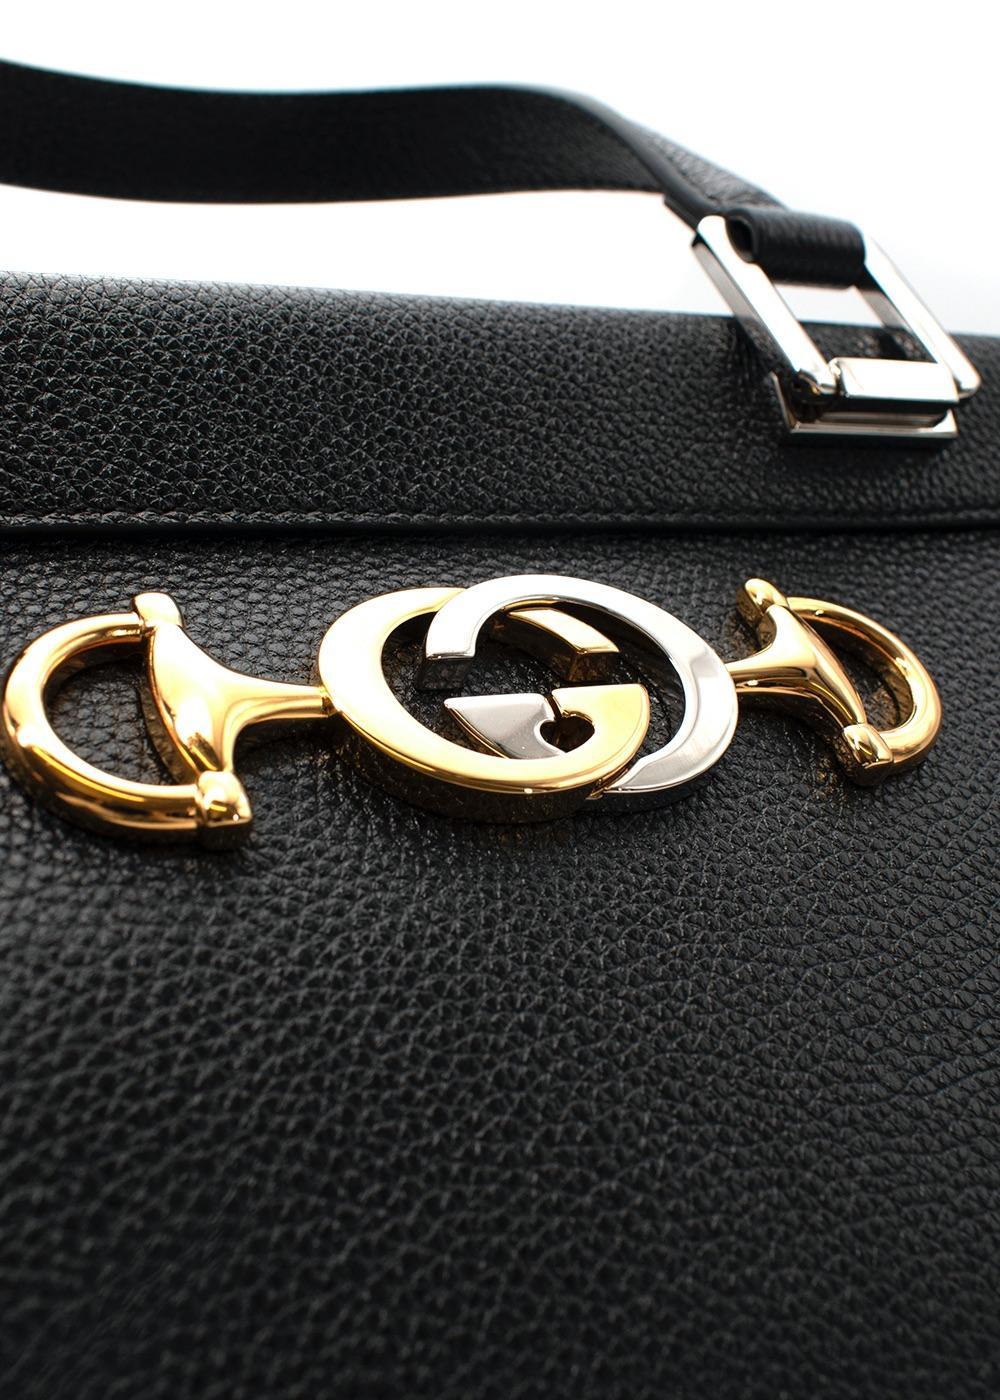 Gucci Black Leather Zumi Bag In New Condition For Sale In London, GB